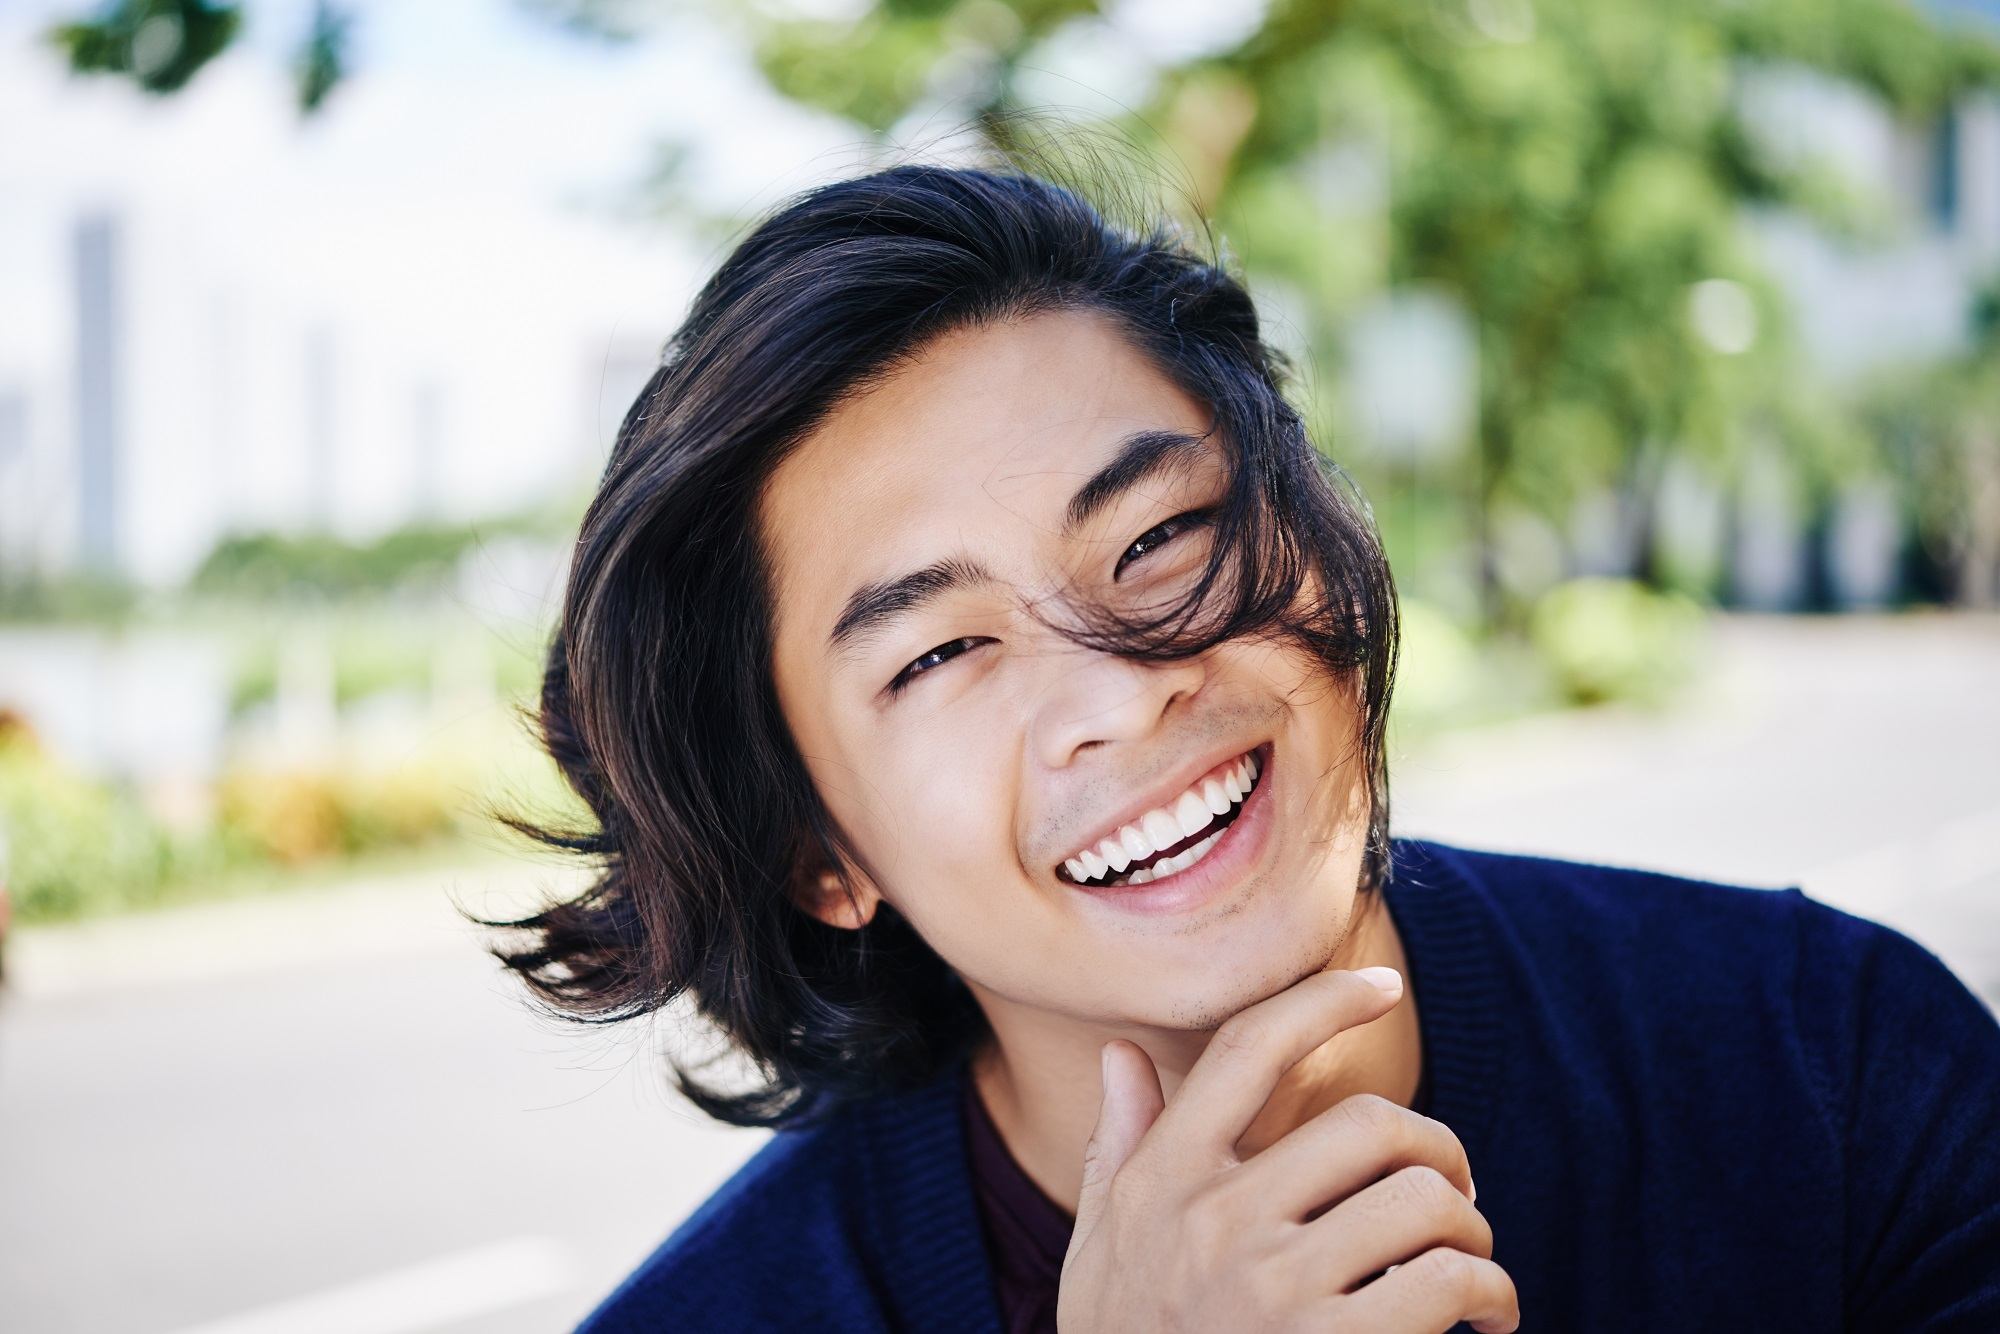 The Surprising Reason Asian Guys Rarely Sport Long Hair - You Won't Believe It!